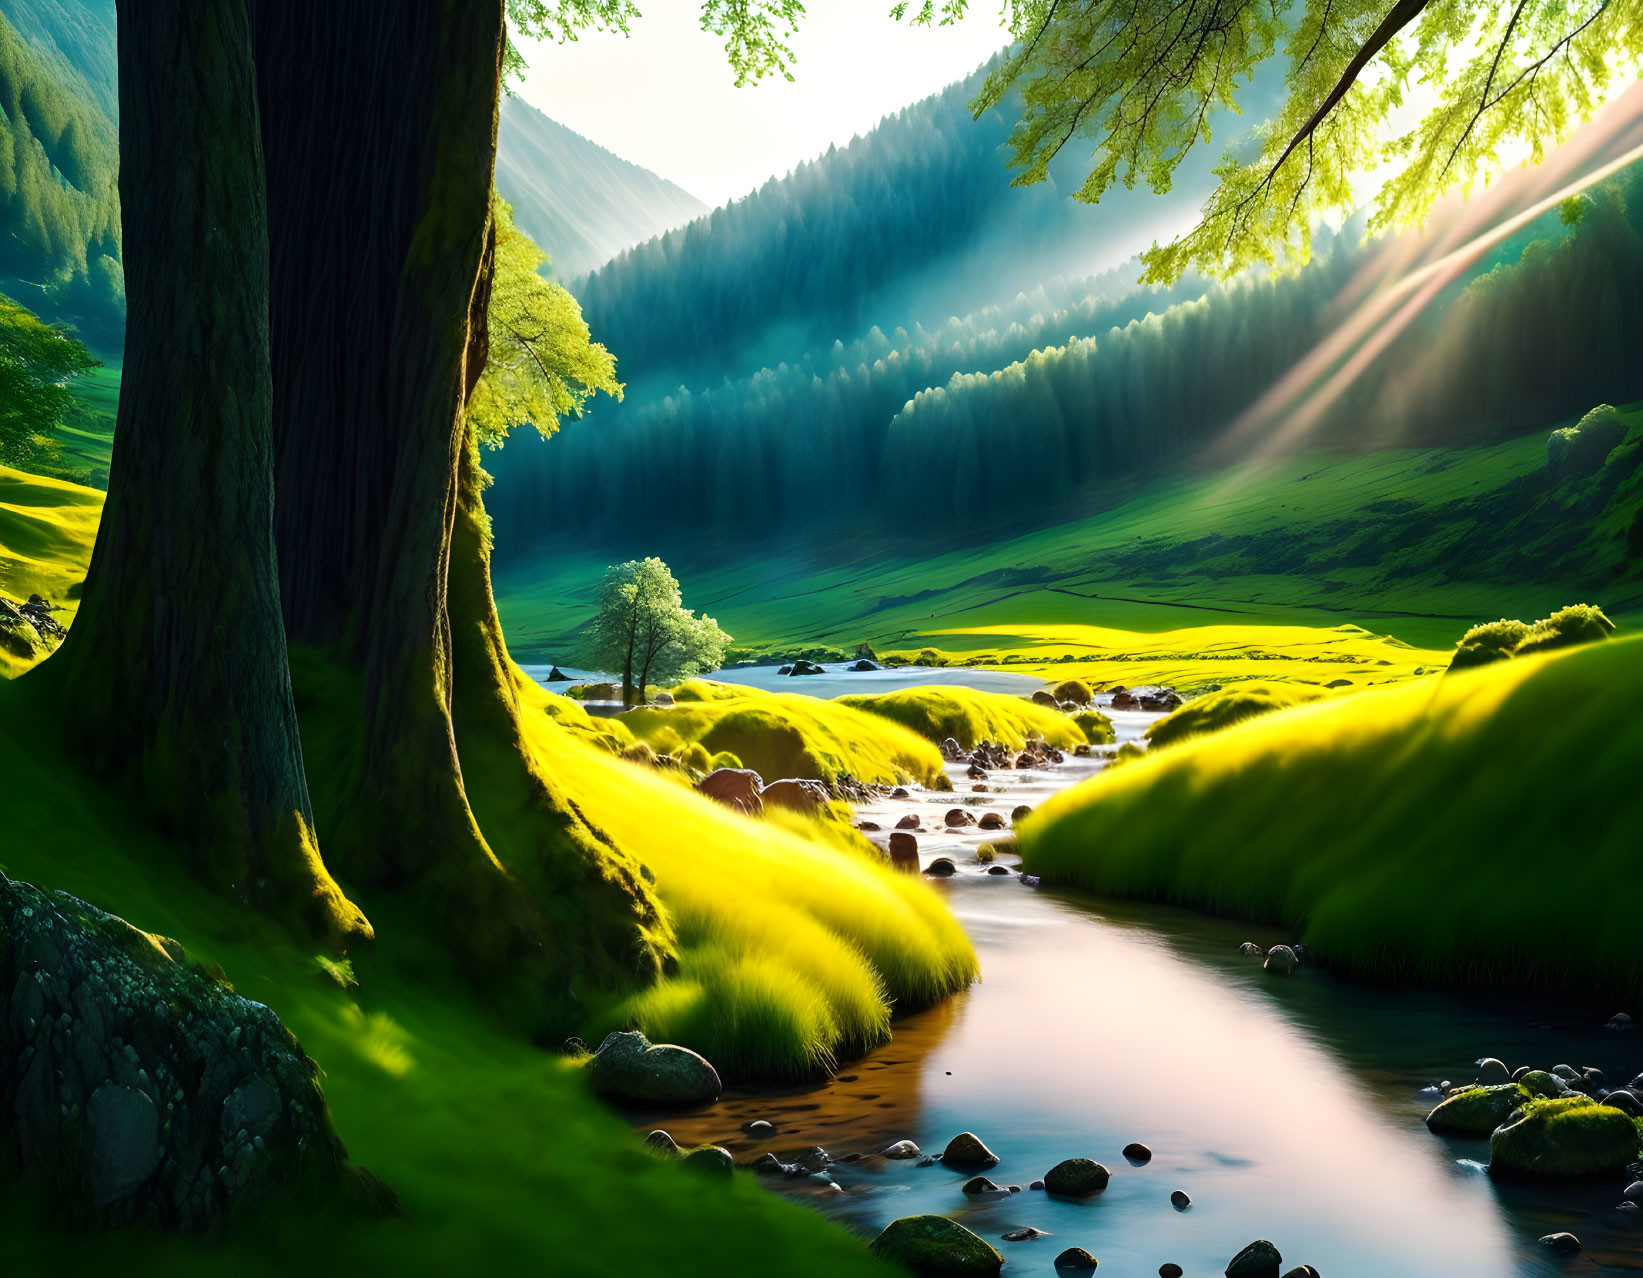 Tranquil River in Lush Valley with Sunbeams